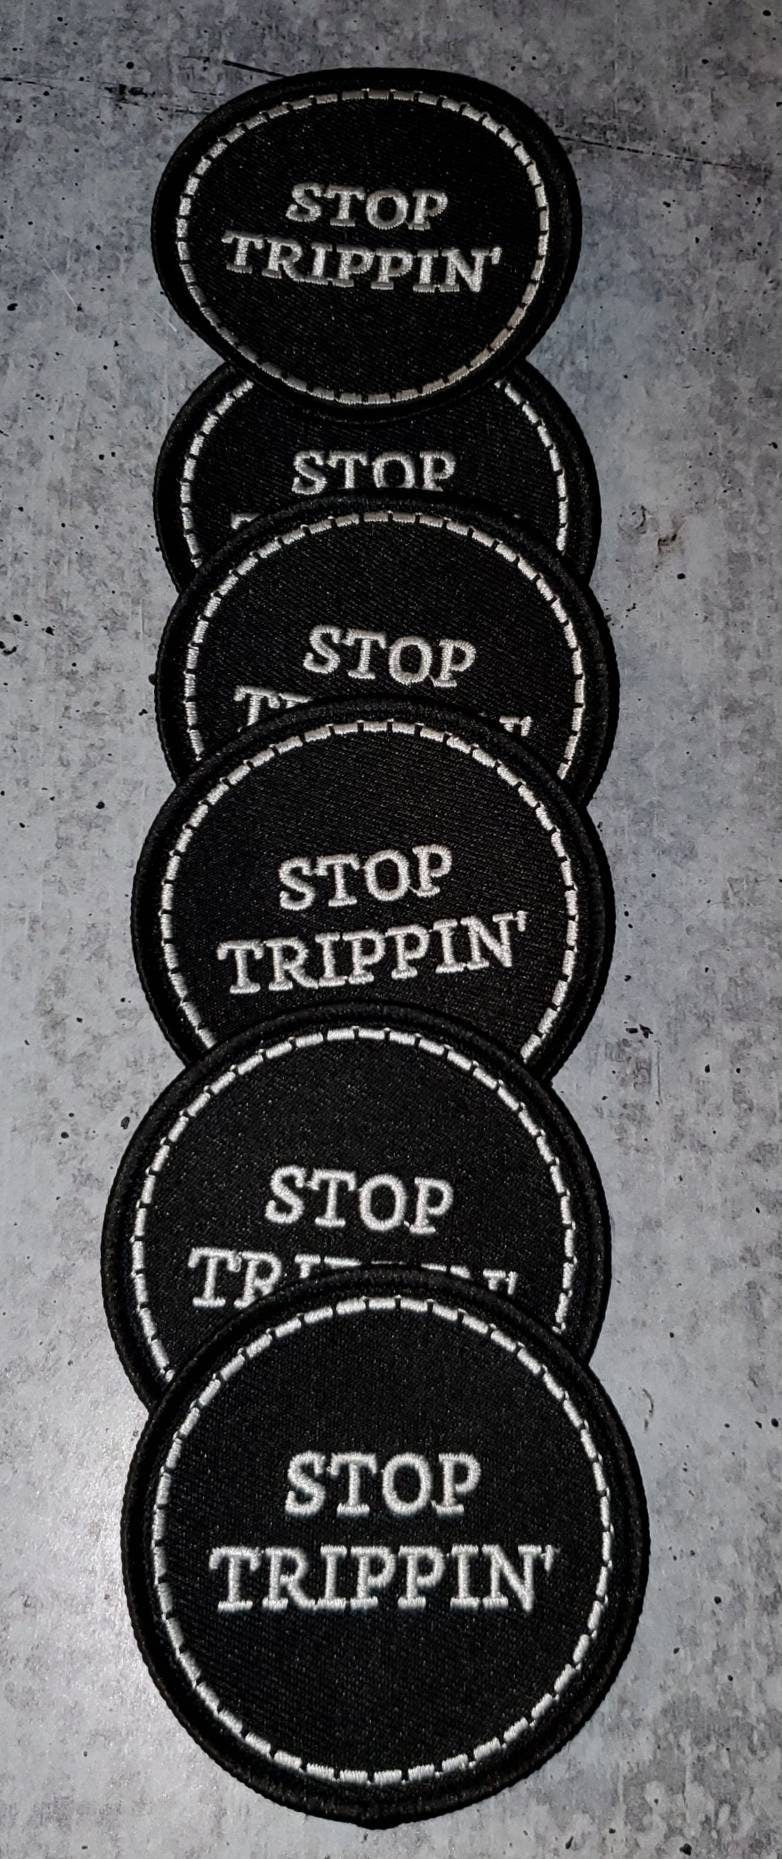 New Arrival,"Stop Trippin" Fun, Black & White, Iron-on Badge, Size 2.75", Cool Statement Patch for Apparel and Accessories, Embroidery